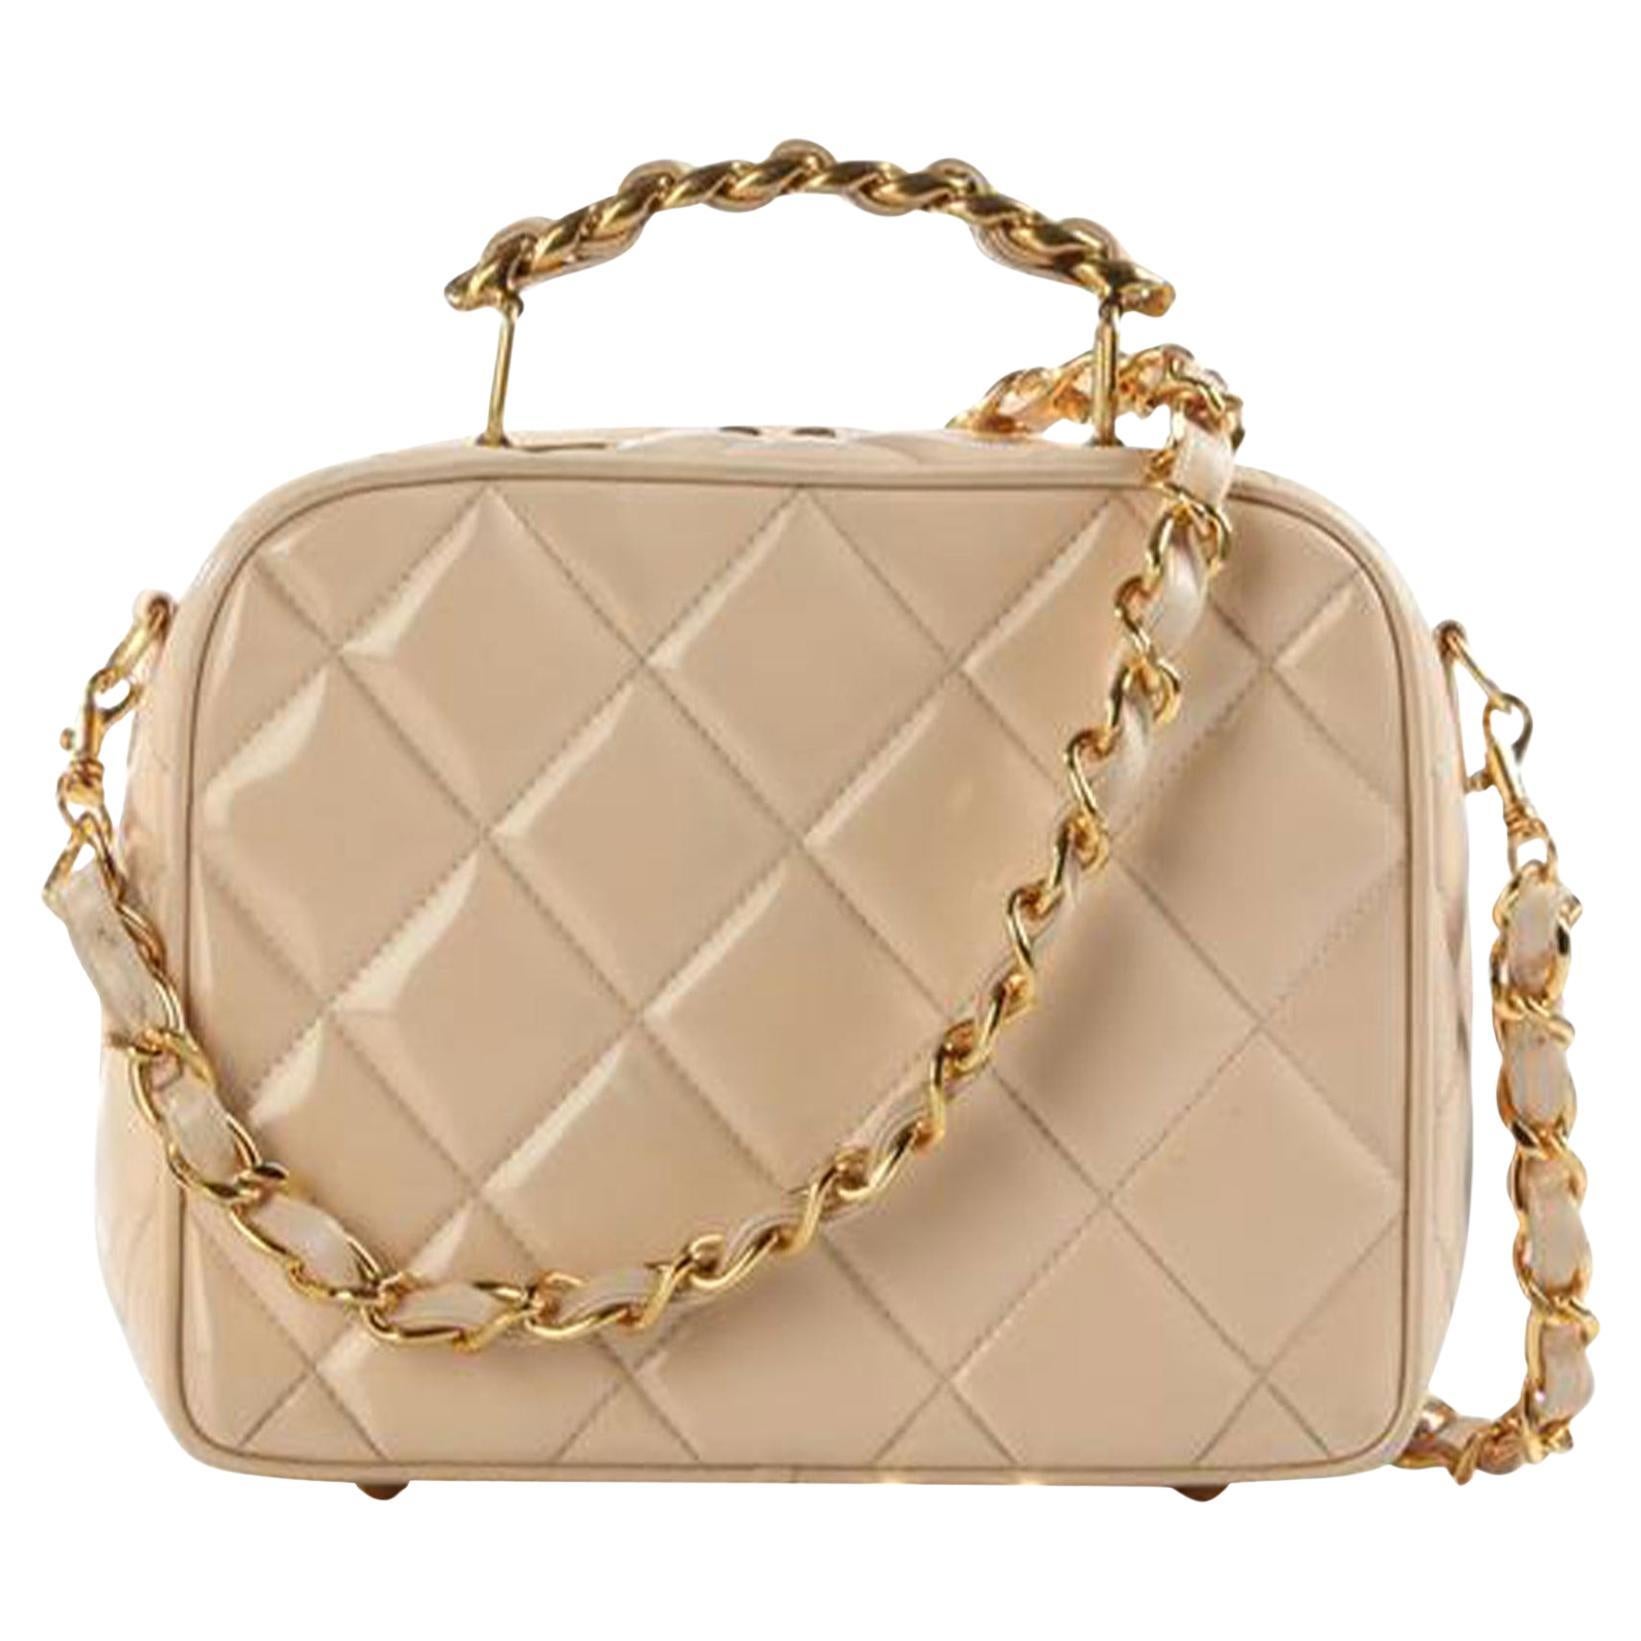 Chanel 1991 Camera Mini Quilted Vintage Rare Beige Nude Patent Cross Body Bag For Sale